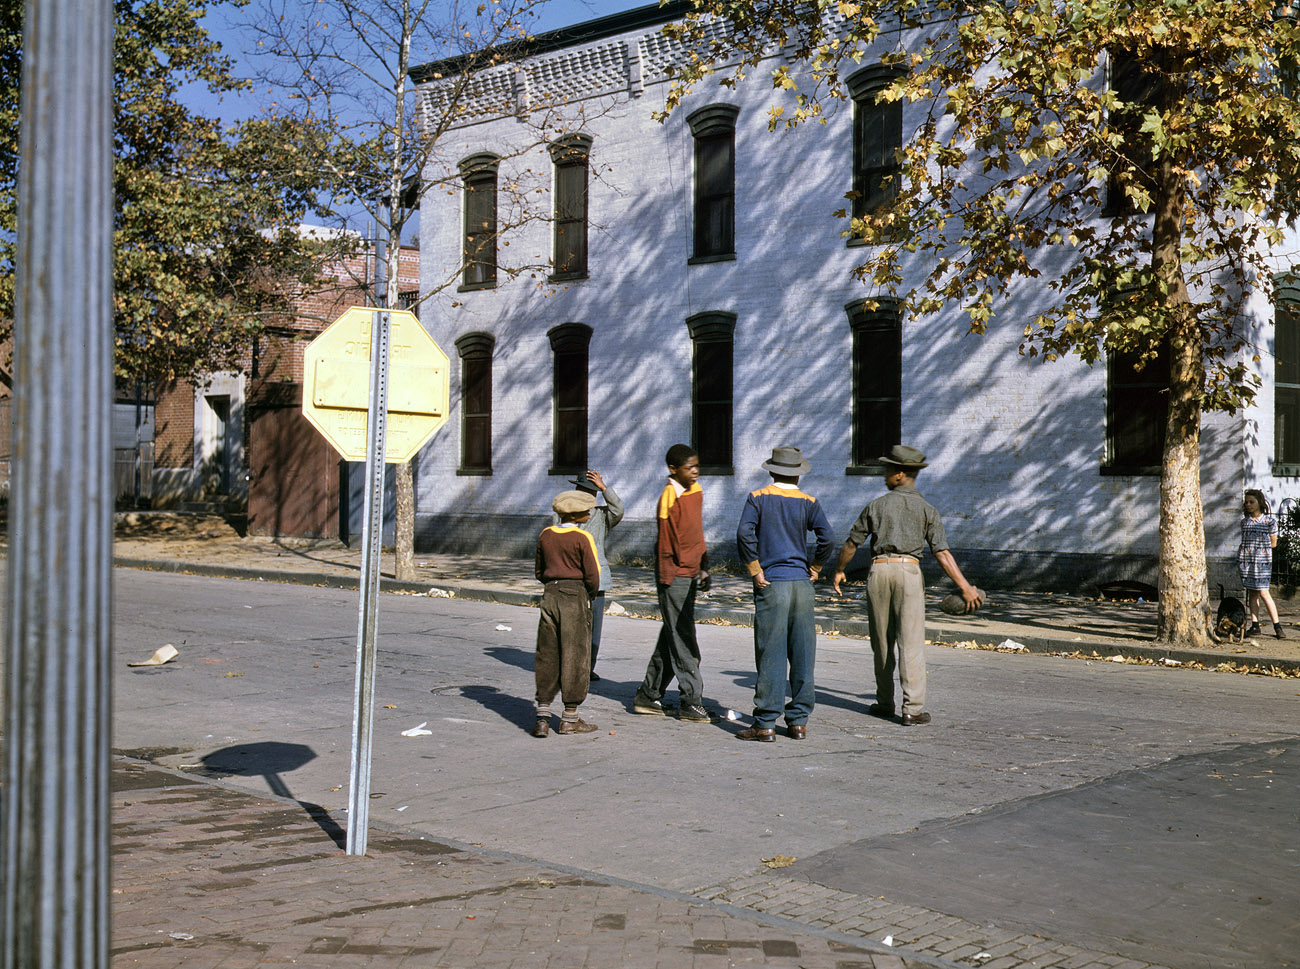 Boys with football at N and Union Streets S.W., Washington D.C. Autumn 1942. The scene at Shulman's Market, back when T-shirts were regarded as underwear and people wore actual clothes. View full size. Photograph by Louise Rosskam.